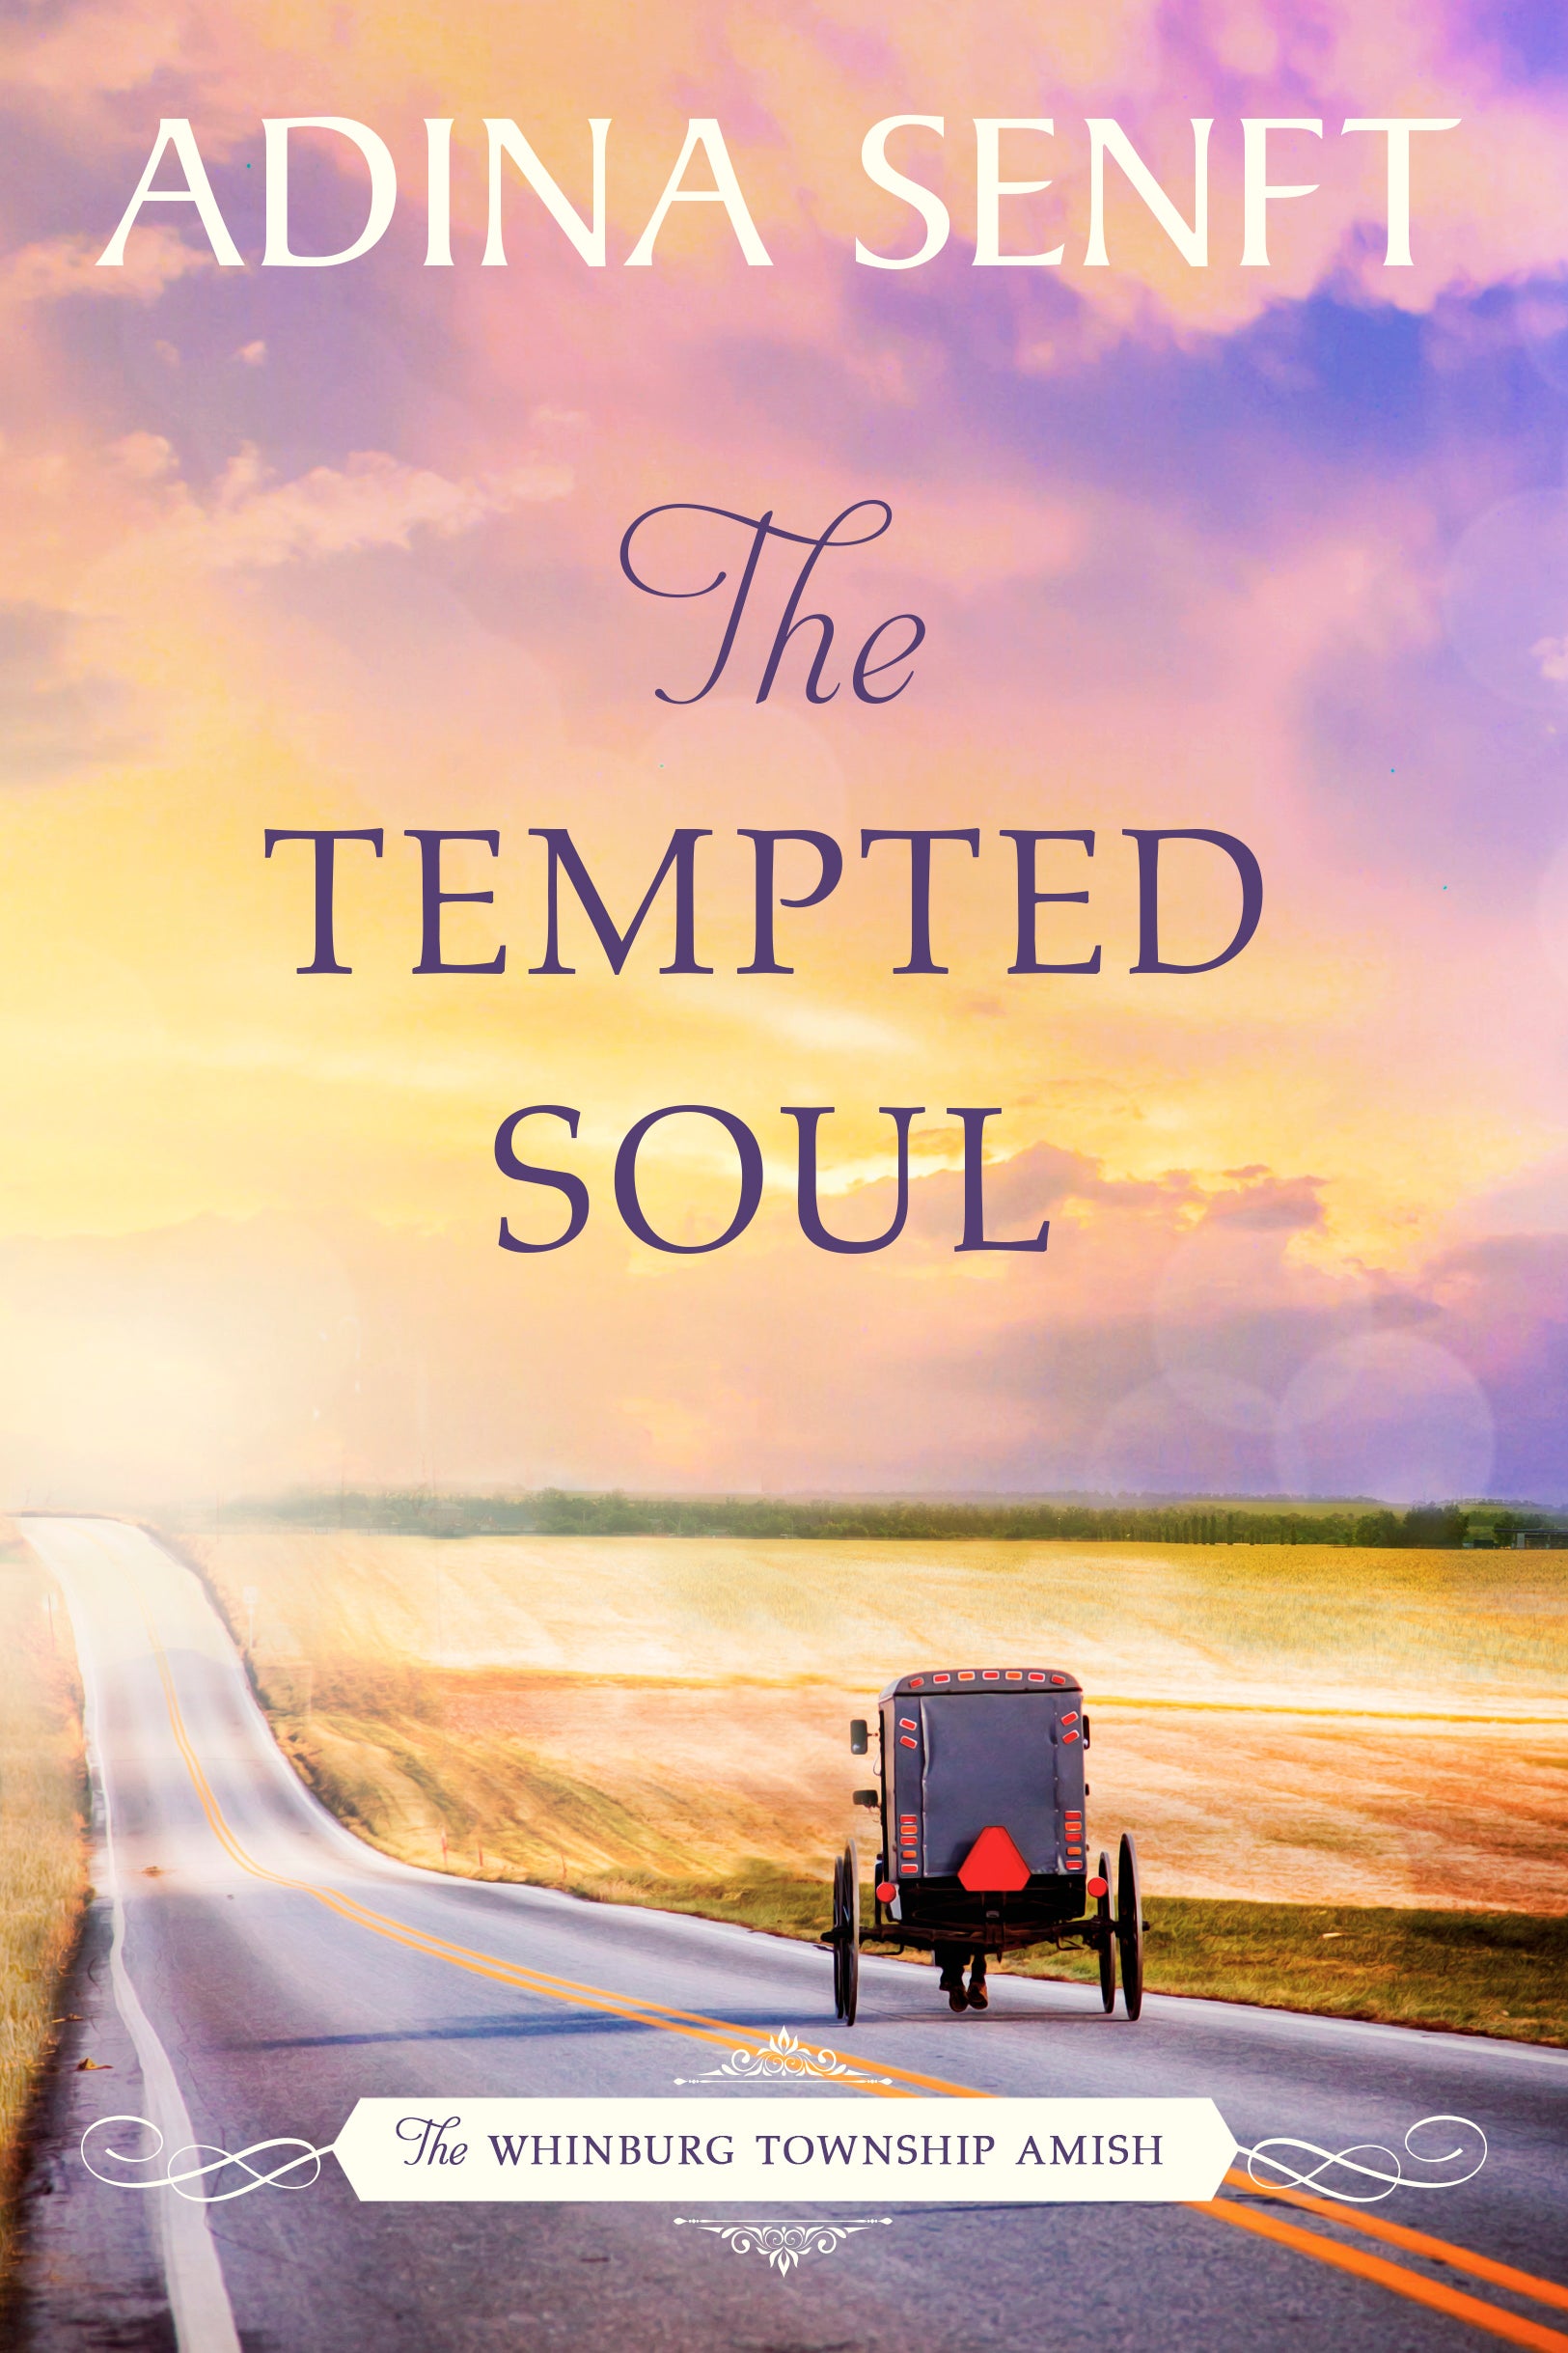 The Tempted Soul by Adina Senft, a Whinburg Township Amish women's fiction romance